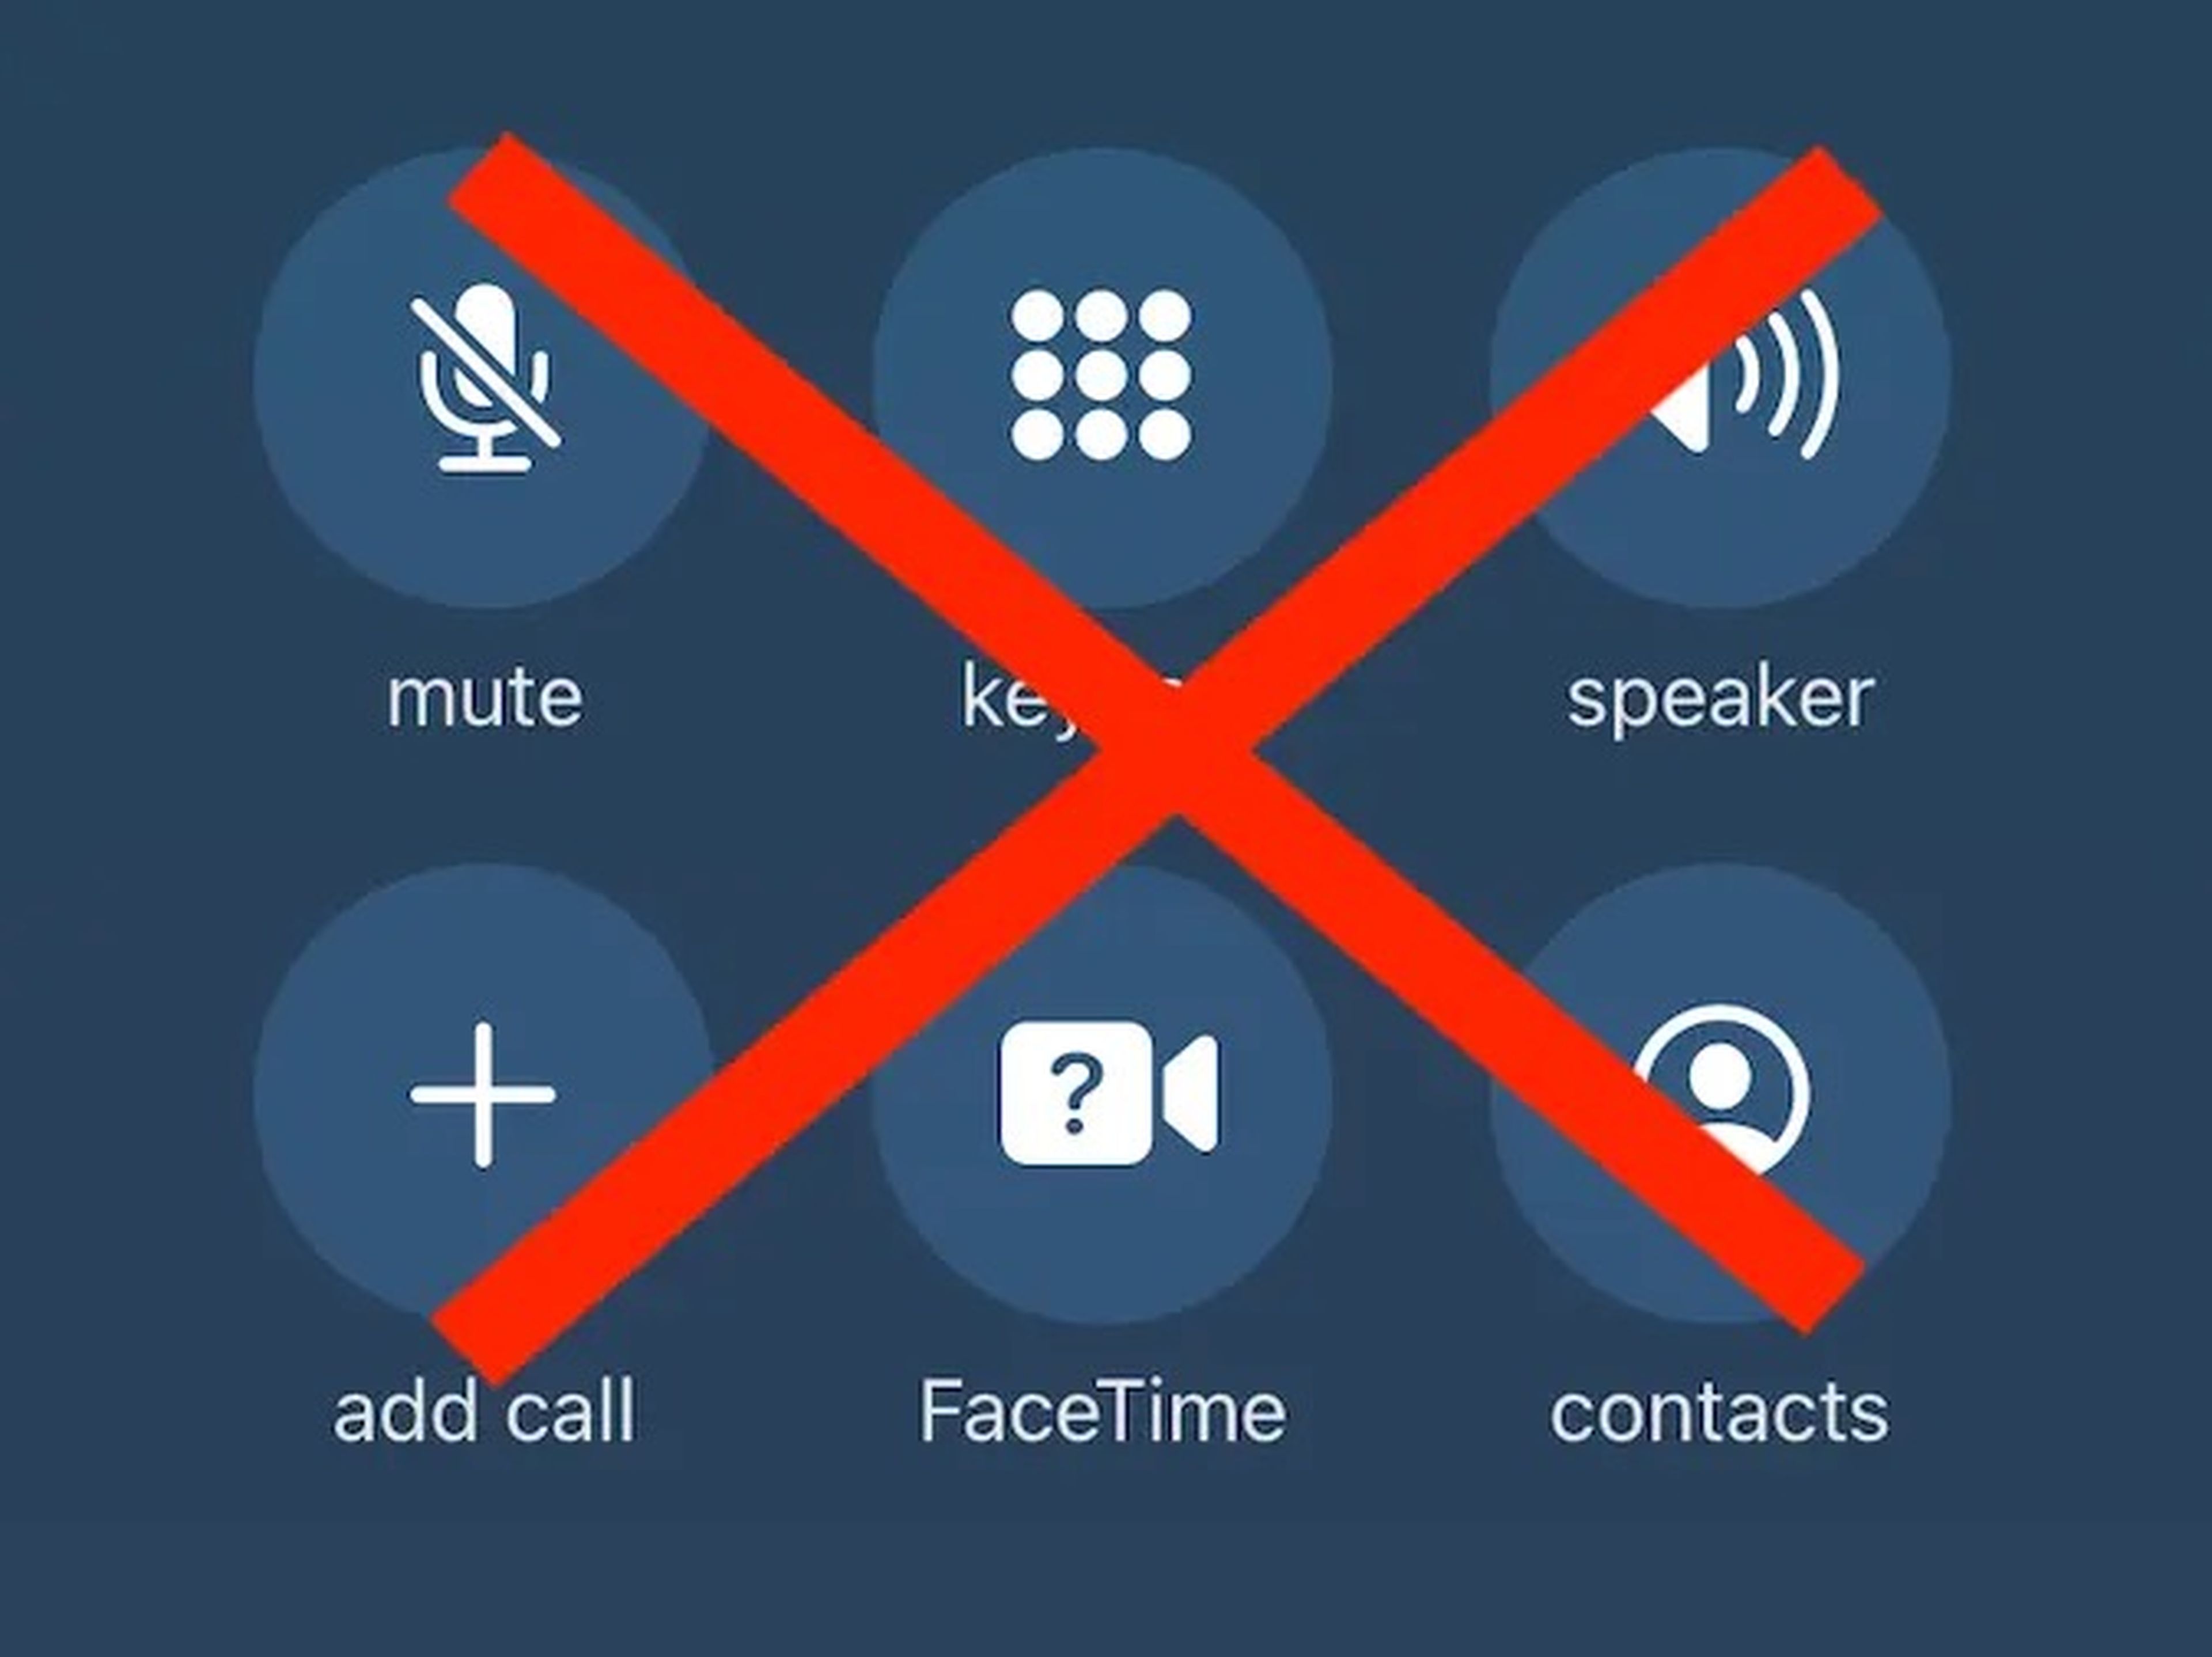 a red "X" over the current Apple iPhone call layout of six buttons grouped together: mute, keypad, speaker, add call, FaceTime, and contacts